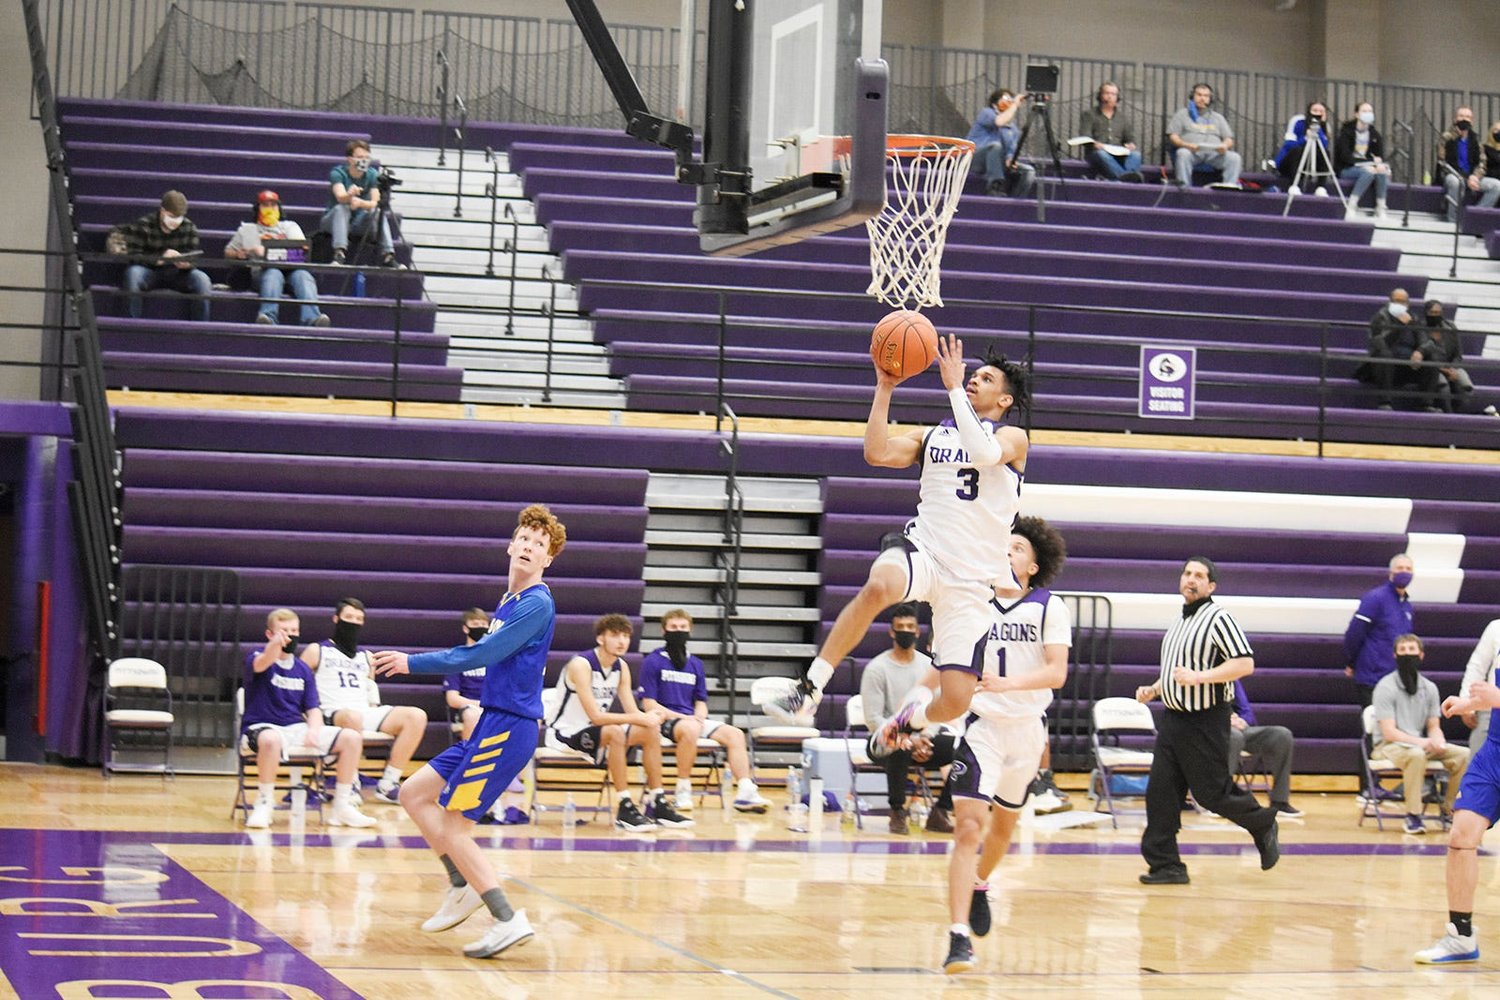 Pittsburg's Javon Grant rises for a layup in Pittsburg's 71-63 home win over Parsons during the regular season.